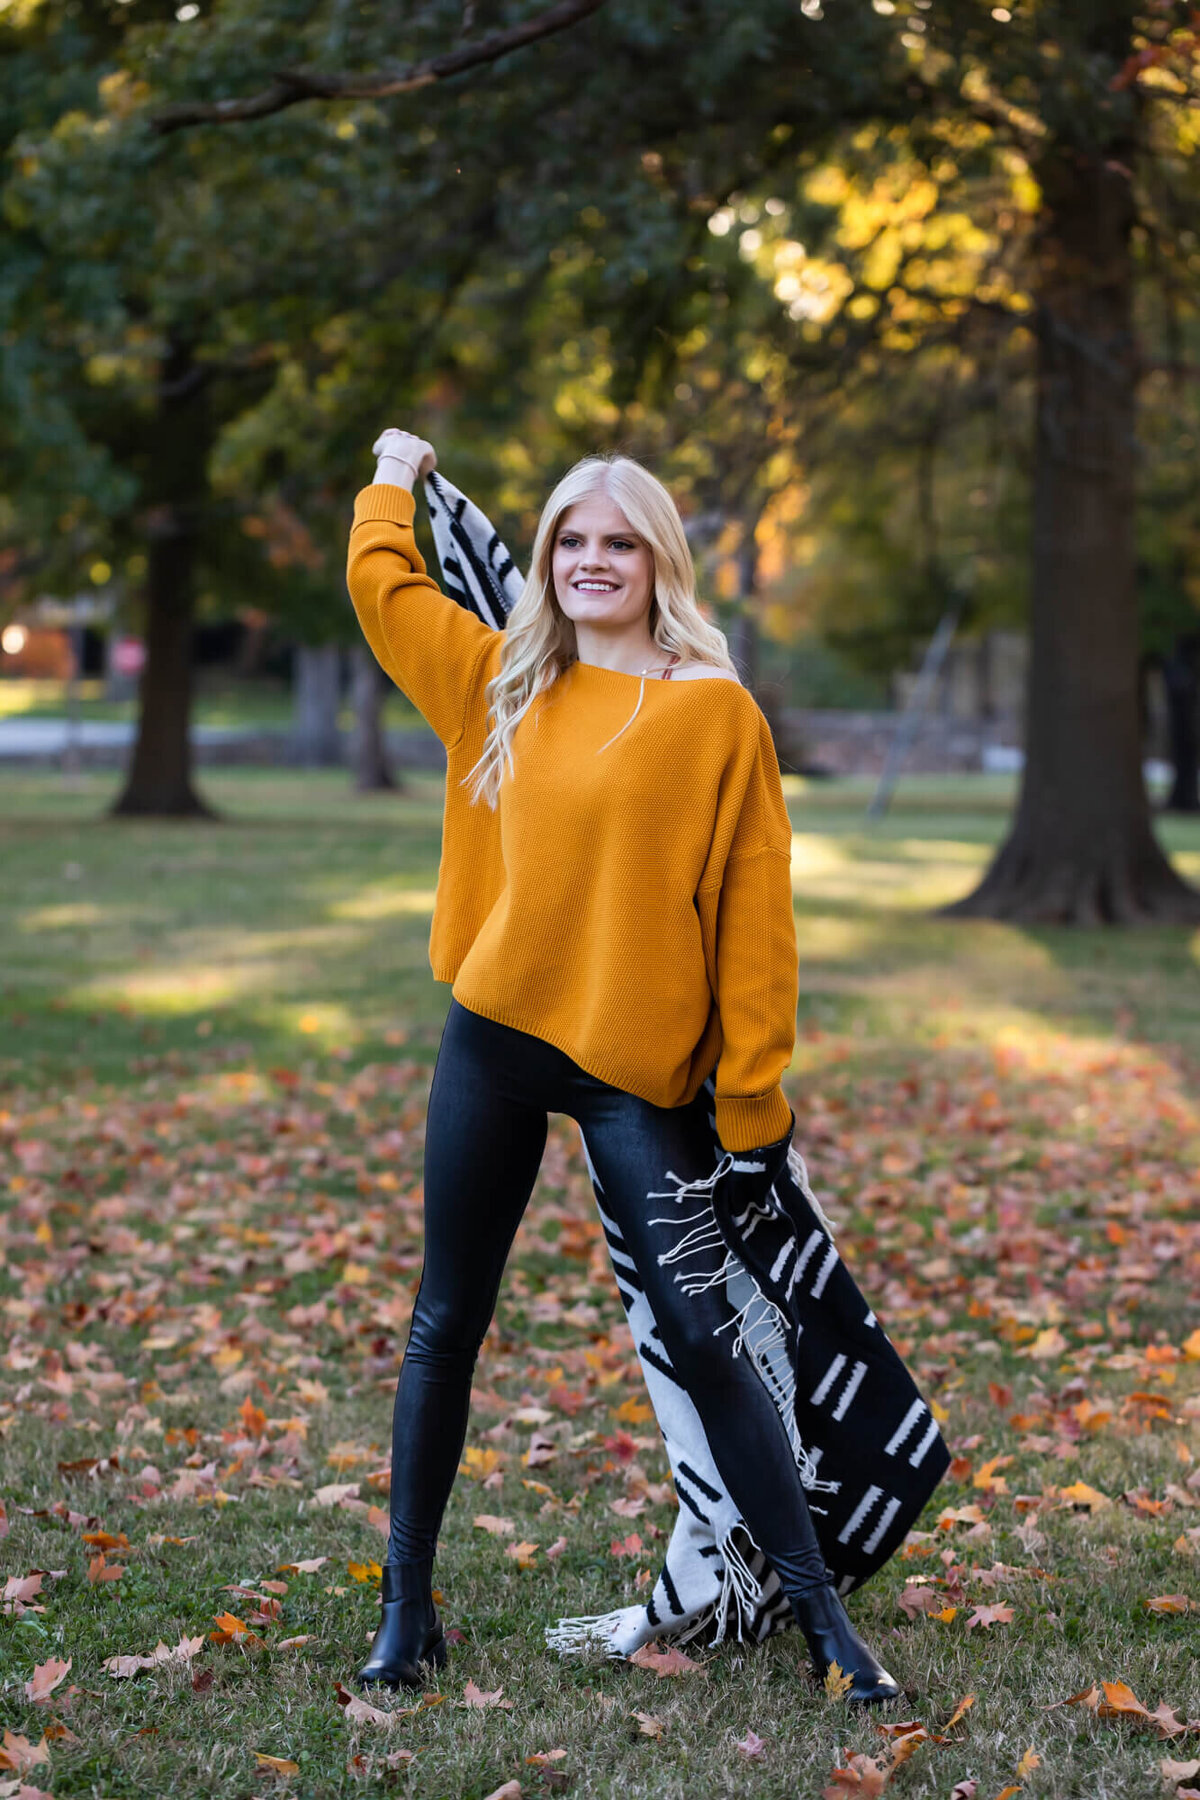 A lovely blonde teen wearing a dark yellow sweater and black leather leggings twirls a black and white blanket behind her in a park covered in Fall leaves. Captured by Springfield, MO senior photographer Dynae Levingston.